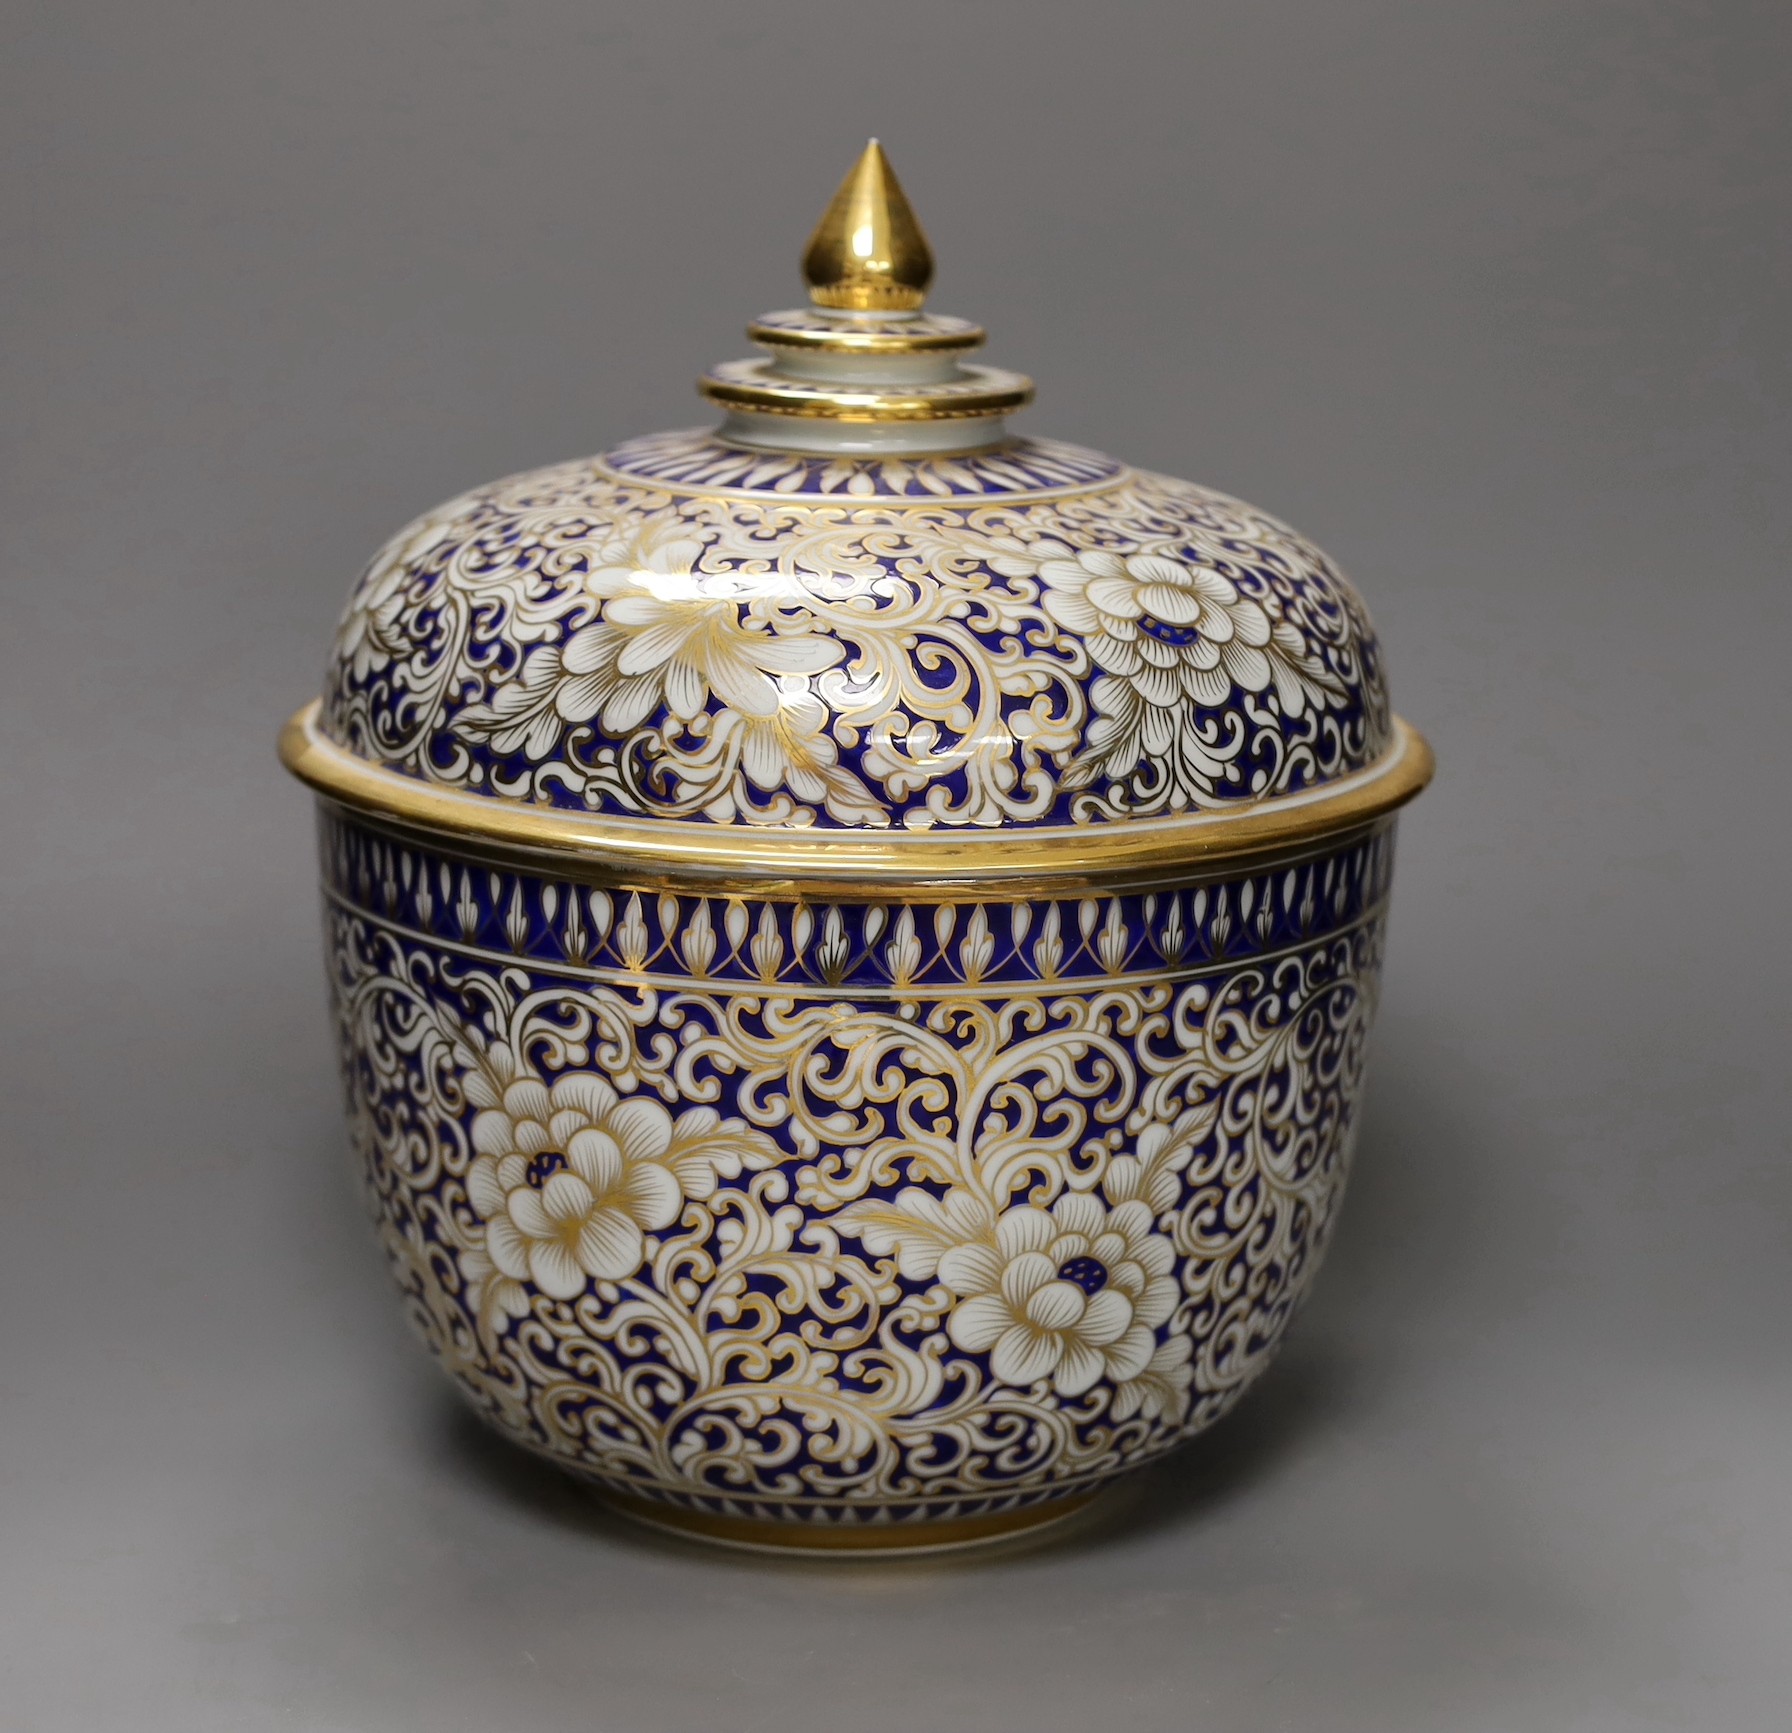 An ornate Continental porcelain bowl and cover, 29cm